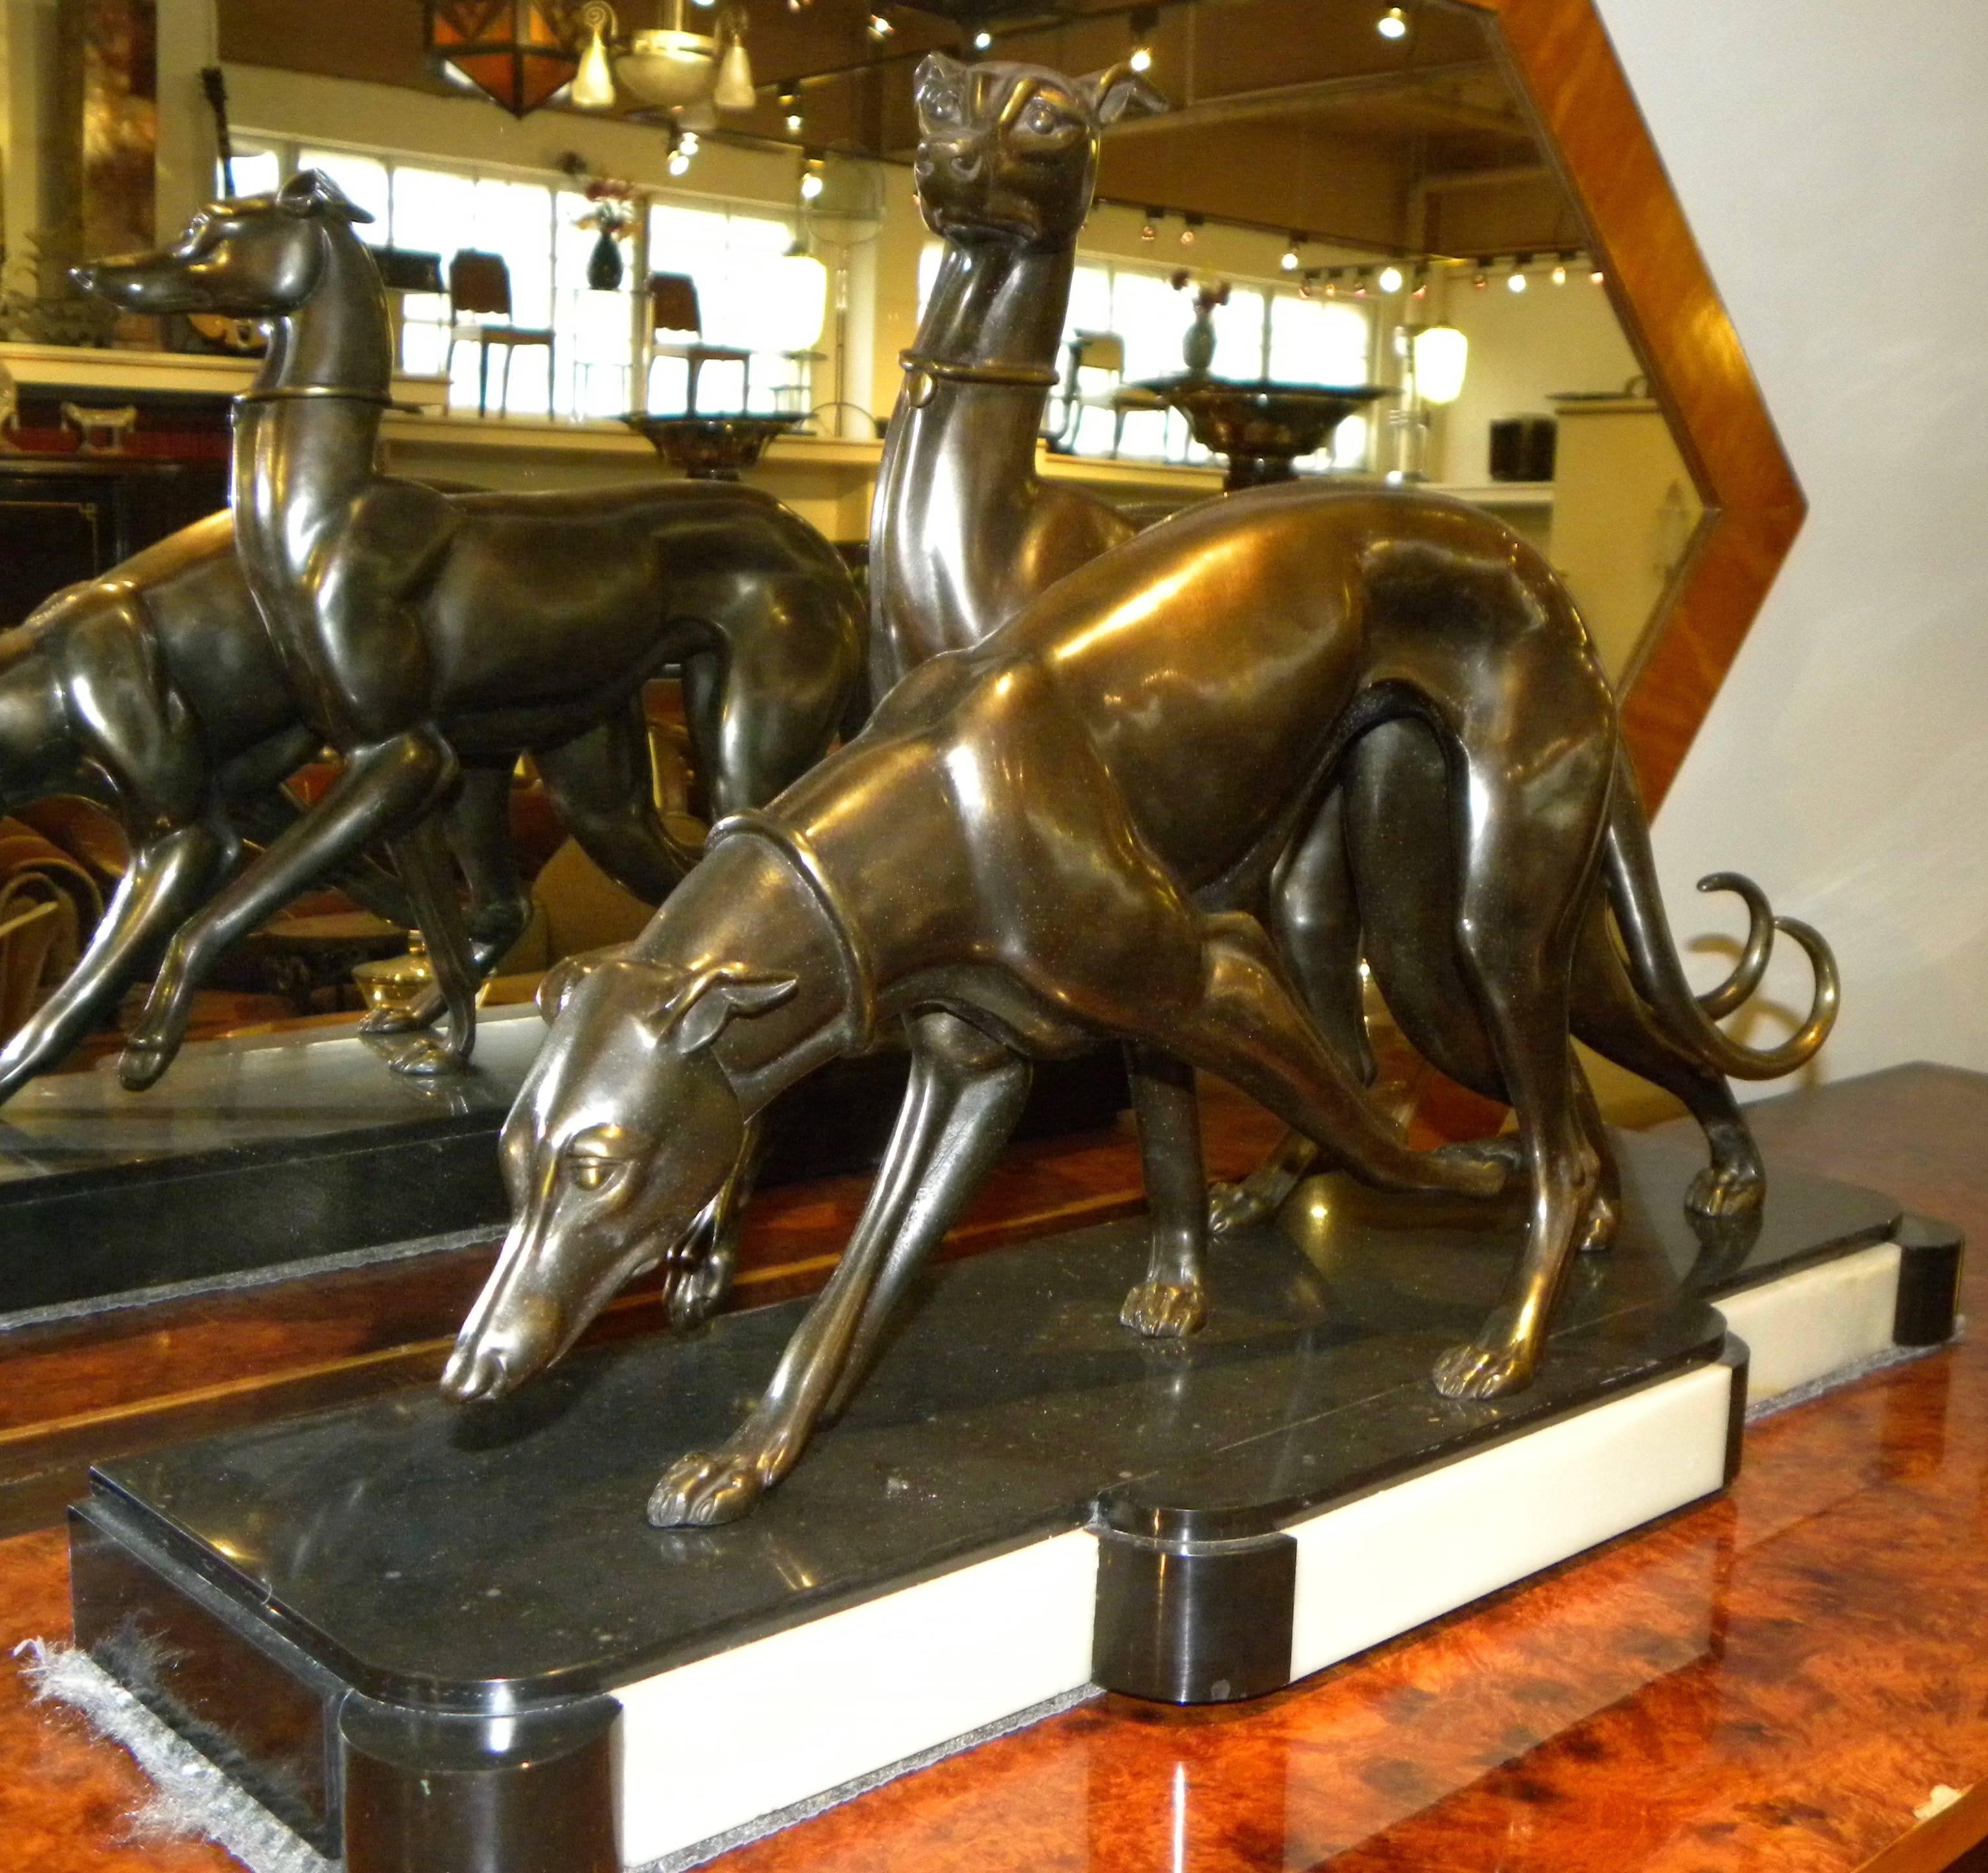 Elegant and regal Greyhound Dogs are the subject of this Art Deco bronze sculpture by Irenee Rochard. The two dogs are in contrasting poses, one standing tall with ears erect and the other in the sharply hunched position of a racing or hunting dog.